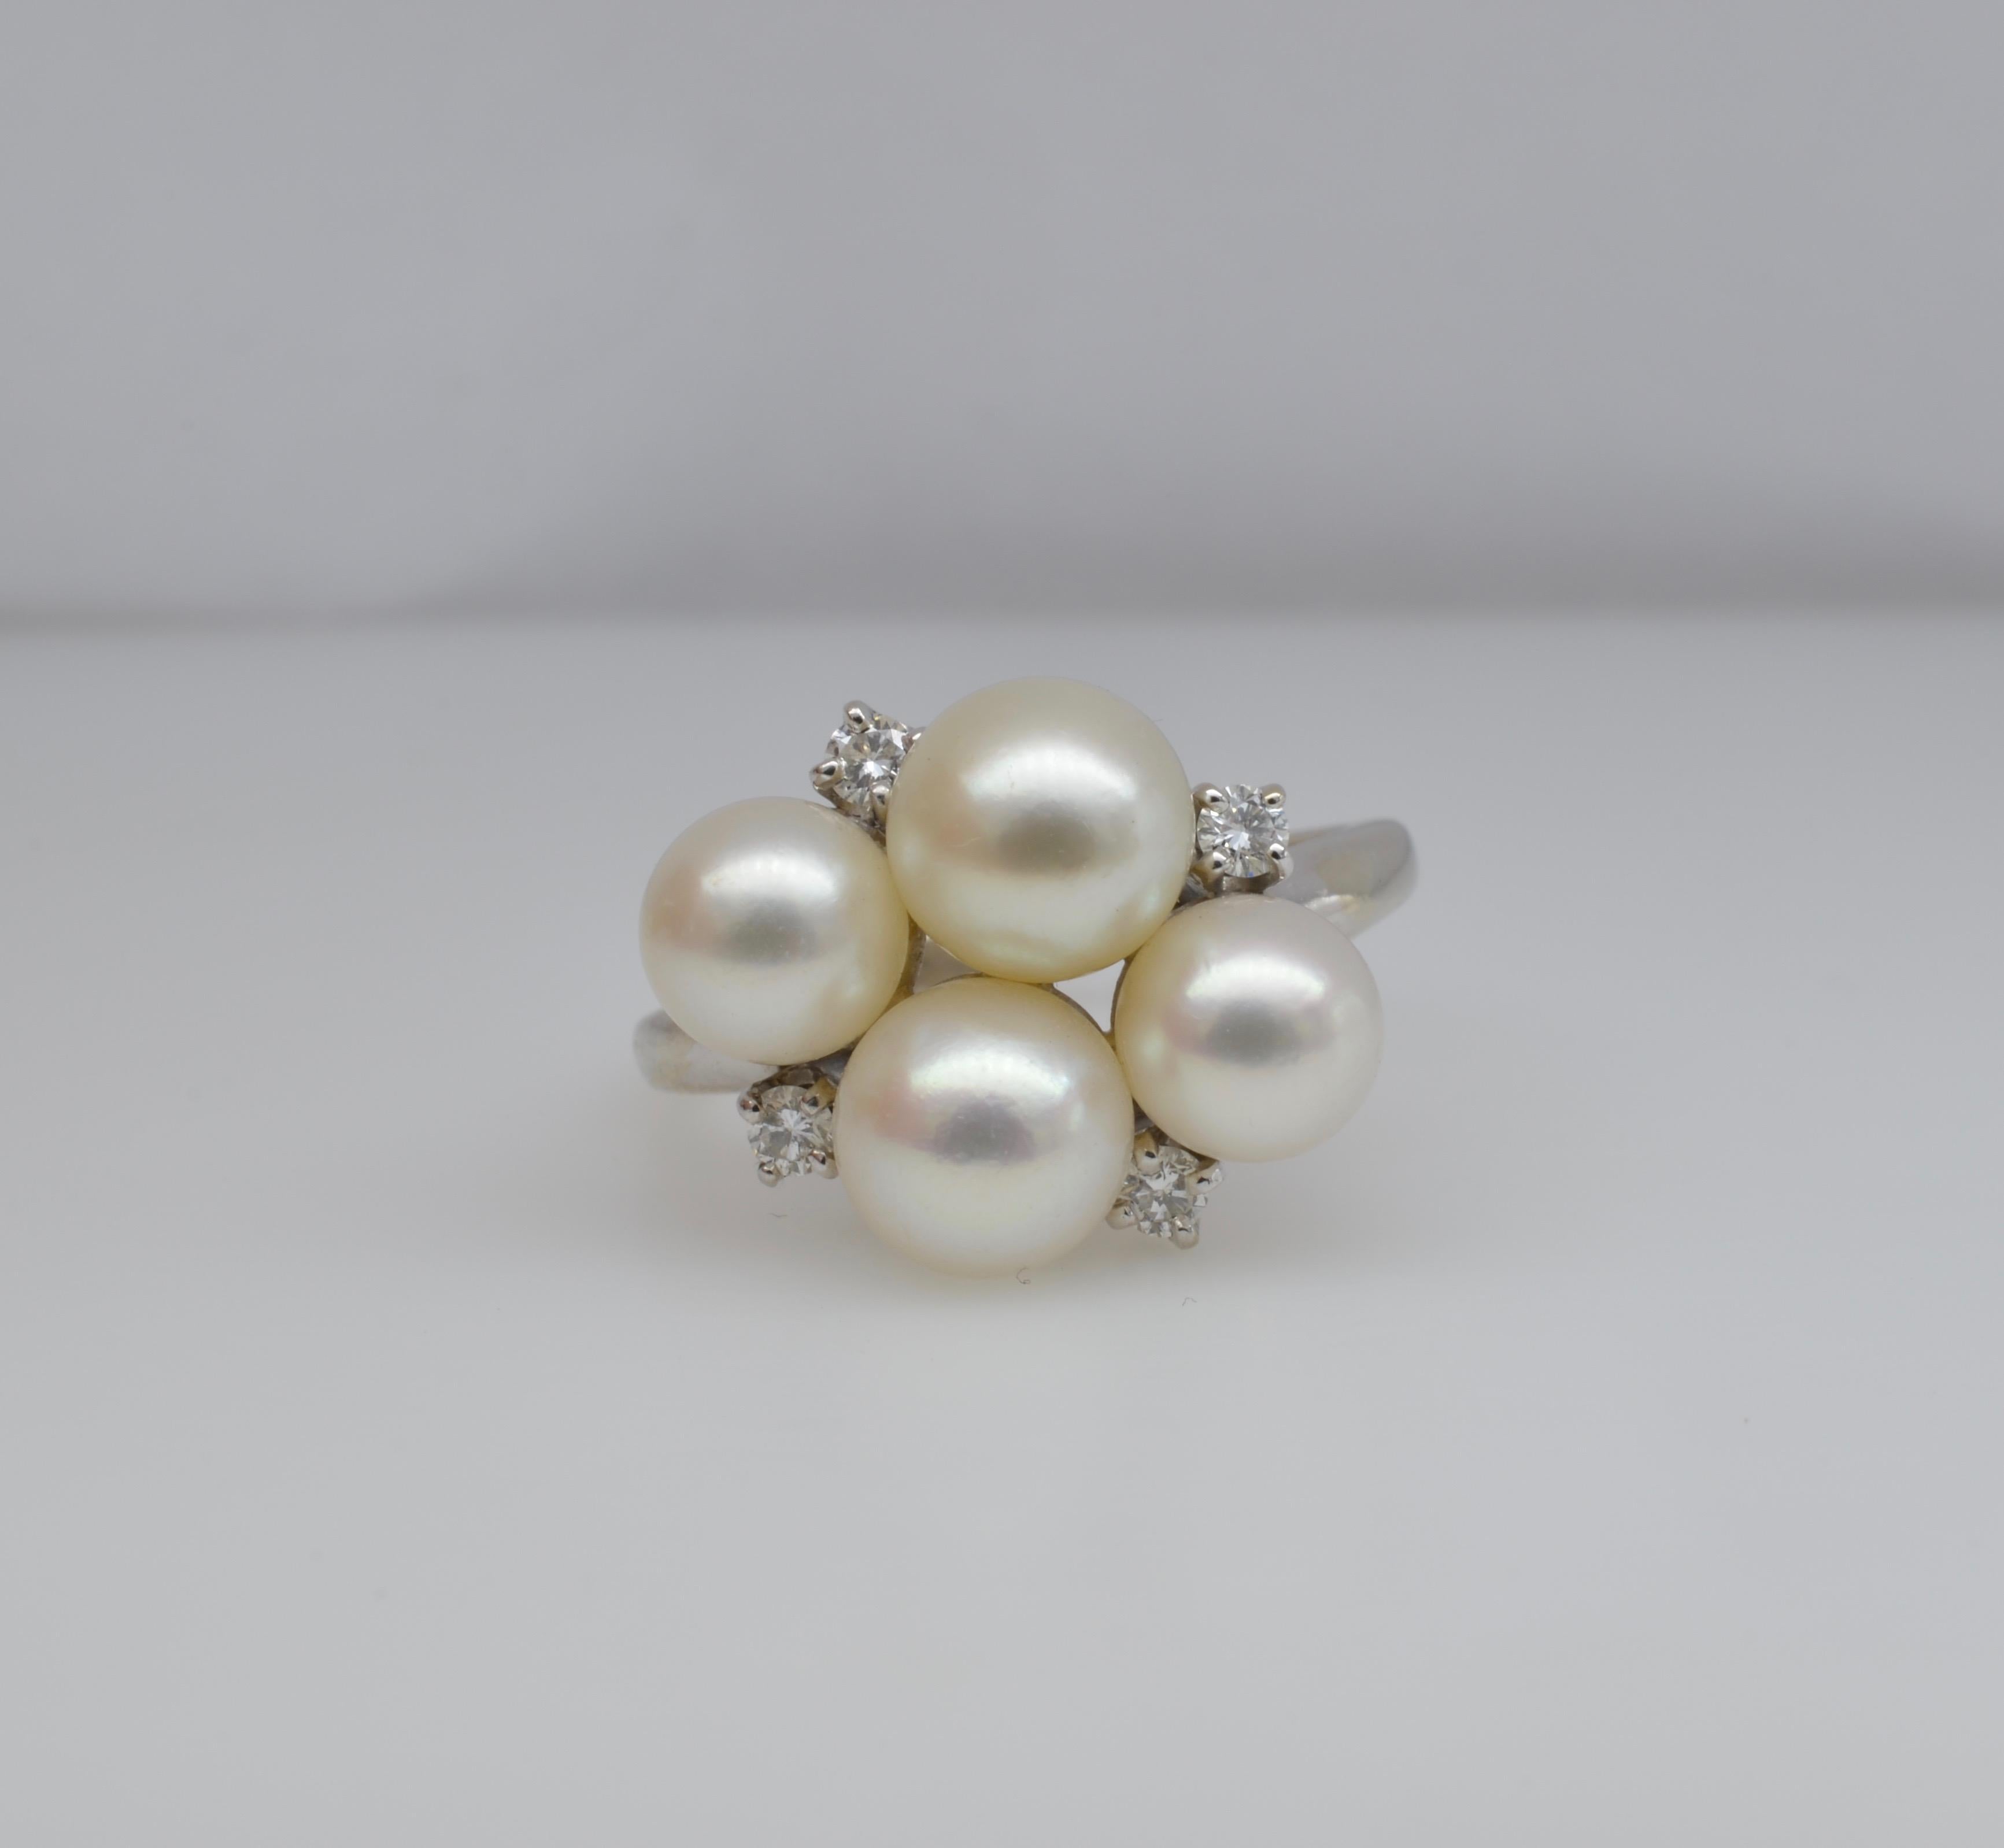 This beautiful Pearl and diamond ring is lovely and sweet. The combination of white 14k gold and the white cultured pearls accented with four diamonds (0.15 TW)  is perfect for any wardrobe. The size is 7 1/4 and can be sized to fit... In the